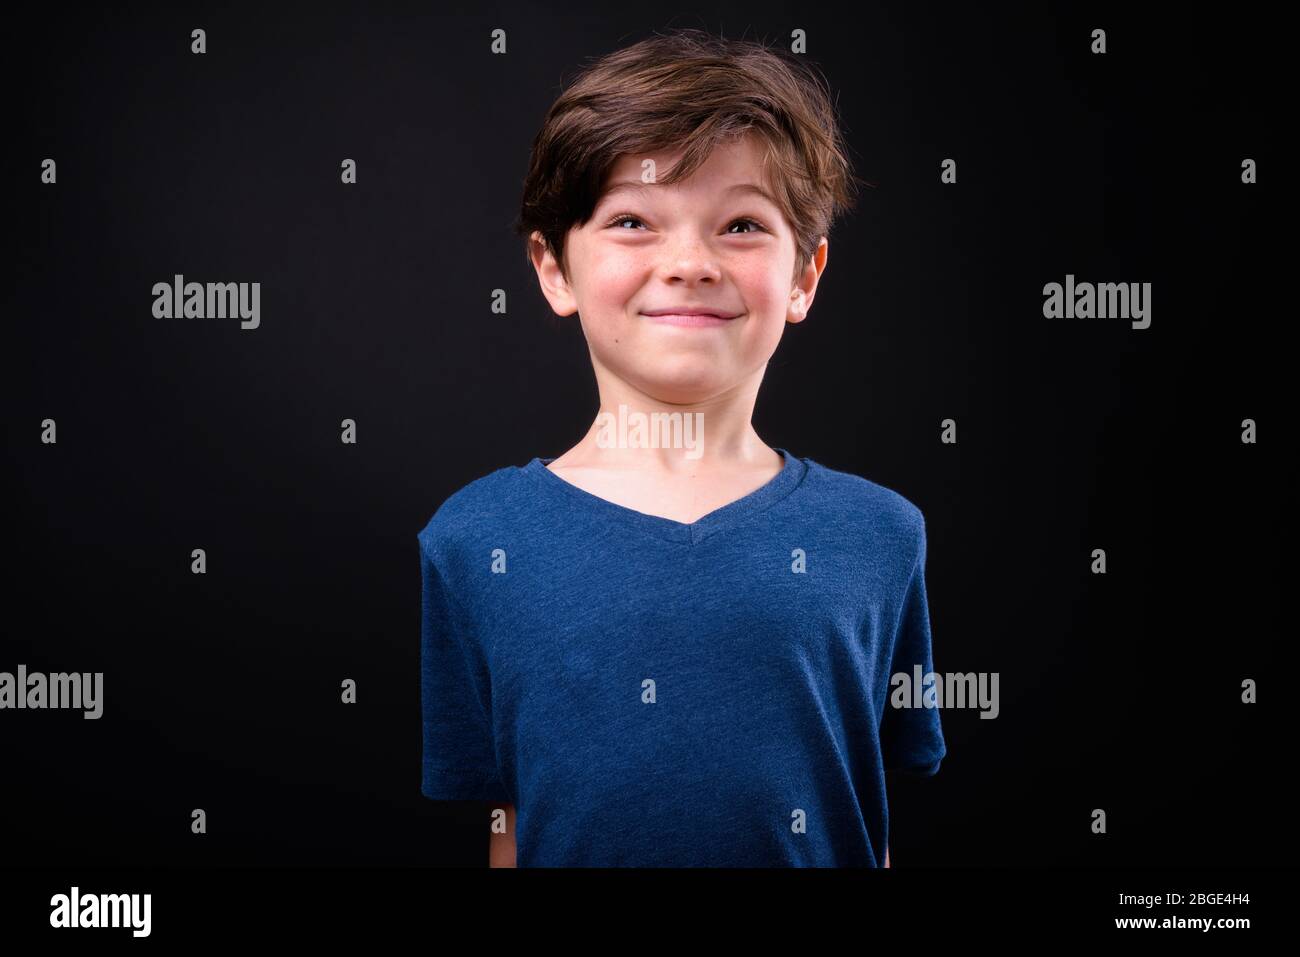 Portrait of happy young handsome boy making funny face Stock Photo